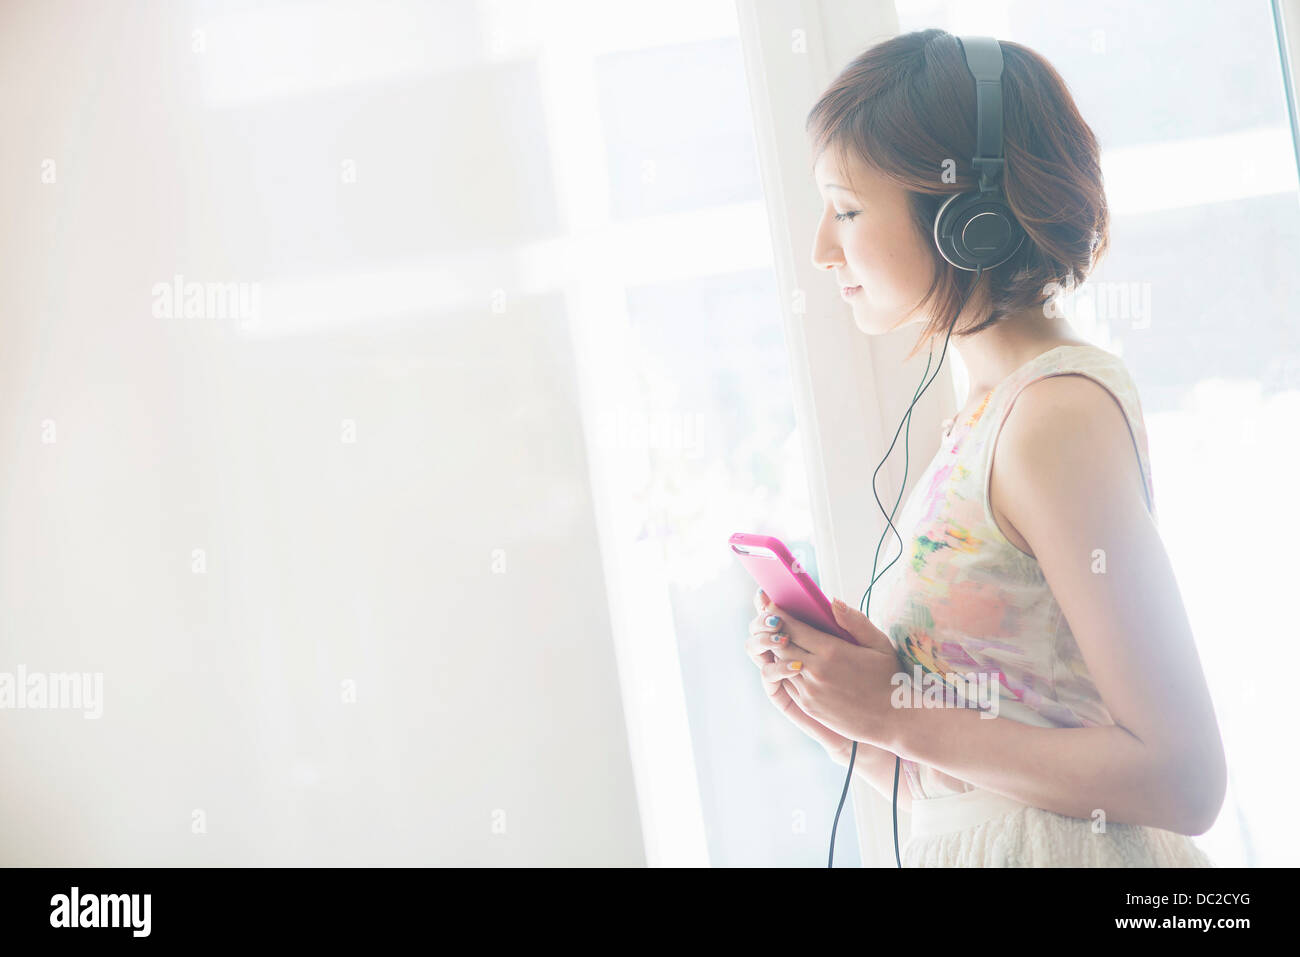 Woman listening to music on mobile phone with earphones Stock Photo